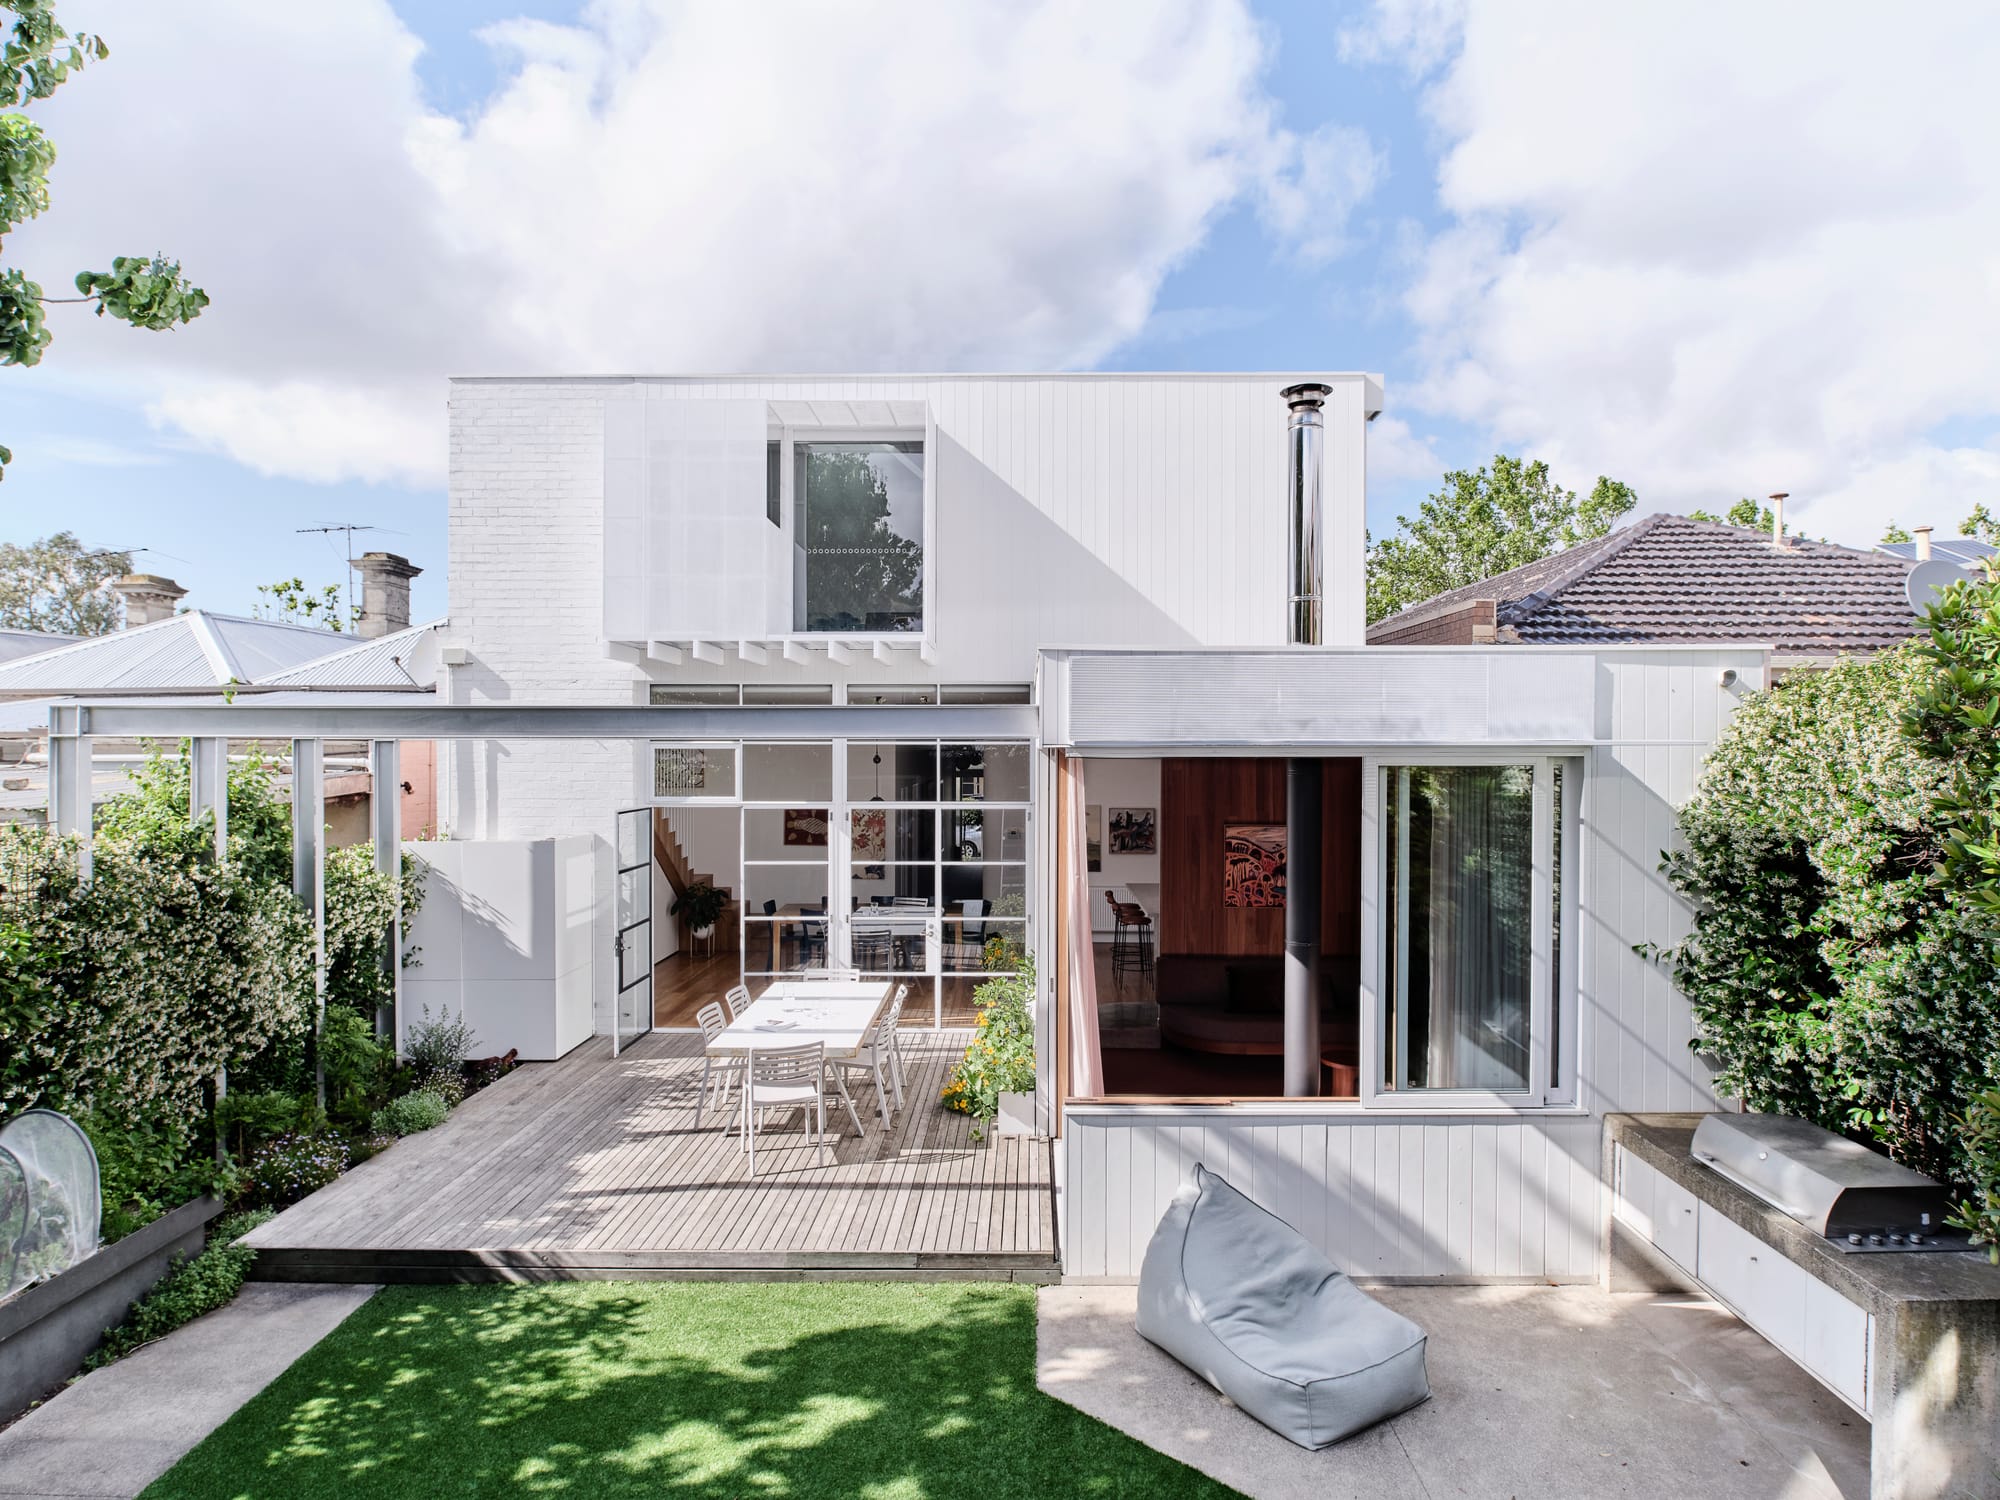 Fitzroy North Residence. Photography by Dean Bradley. Exterior facade of double storey white clad home with pergola and timber deck. Concrete floor outdoor kitchen next to grass.